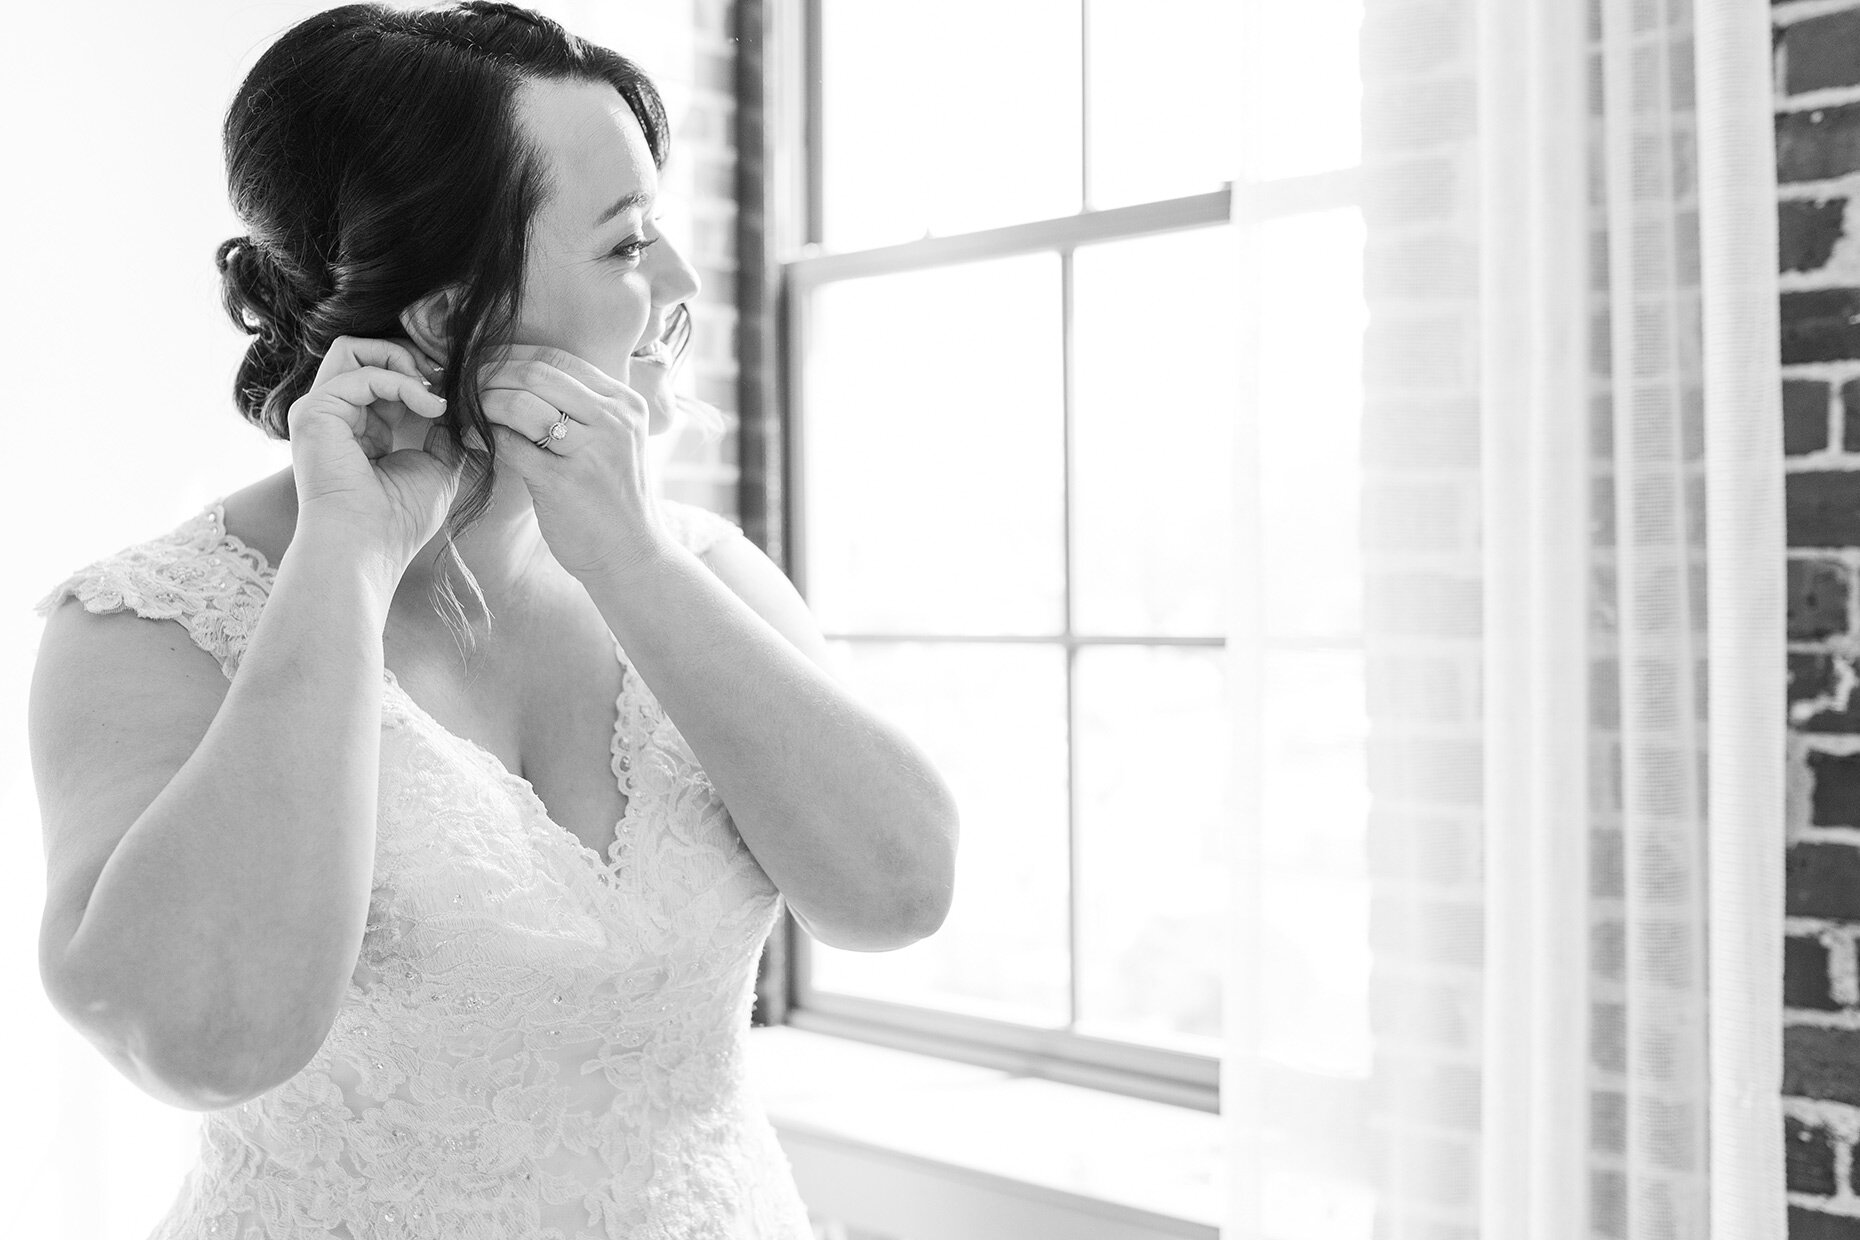 Bride getting ready by window in black and white